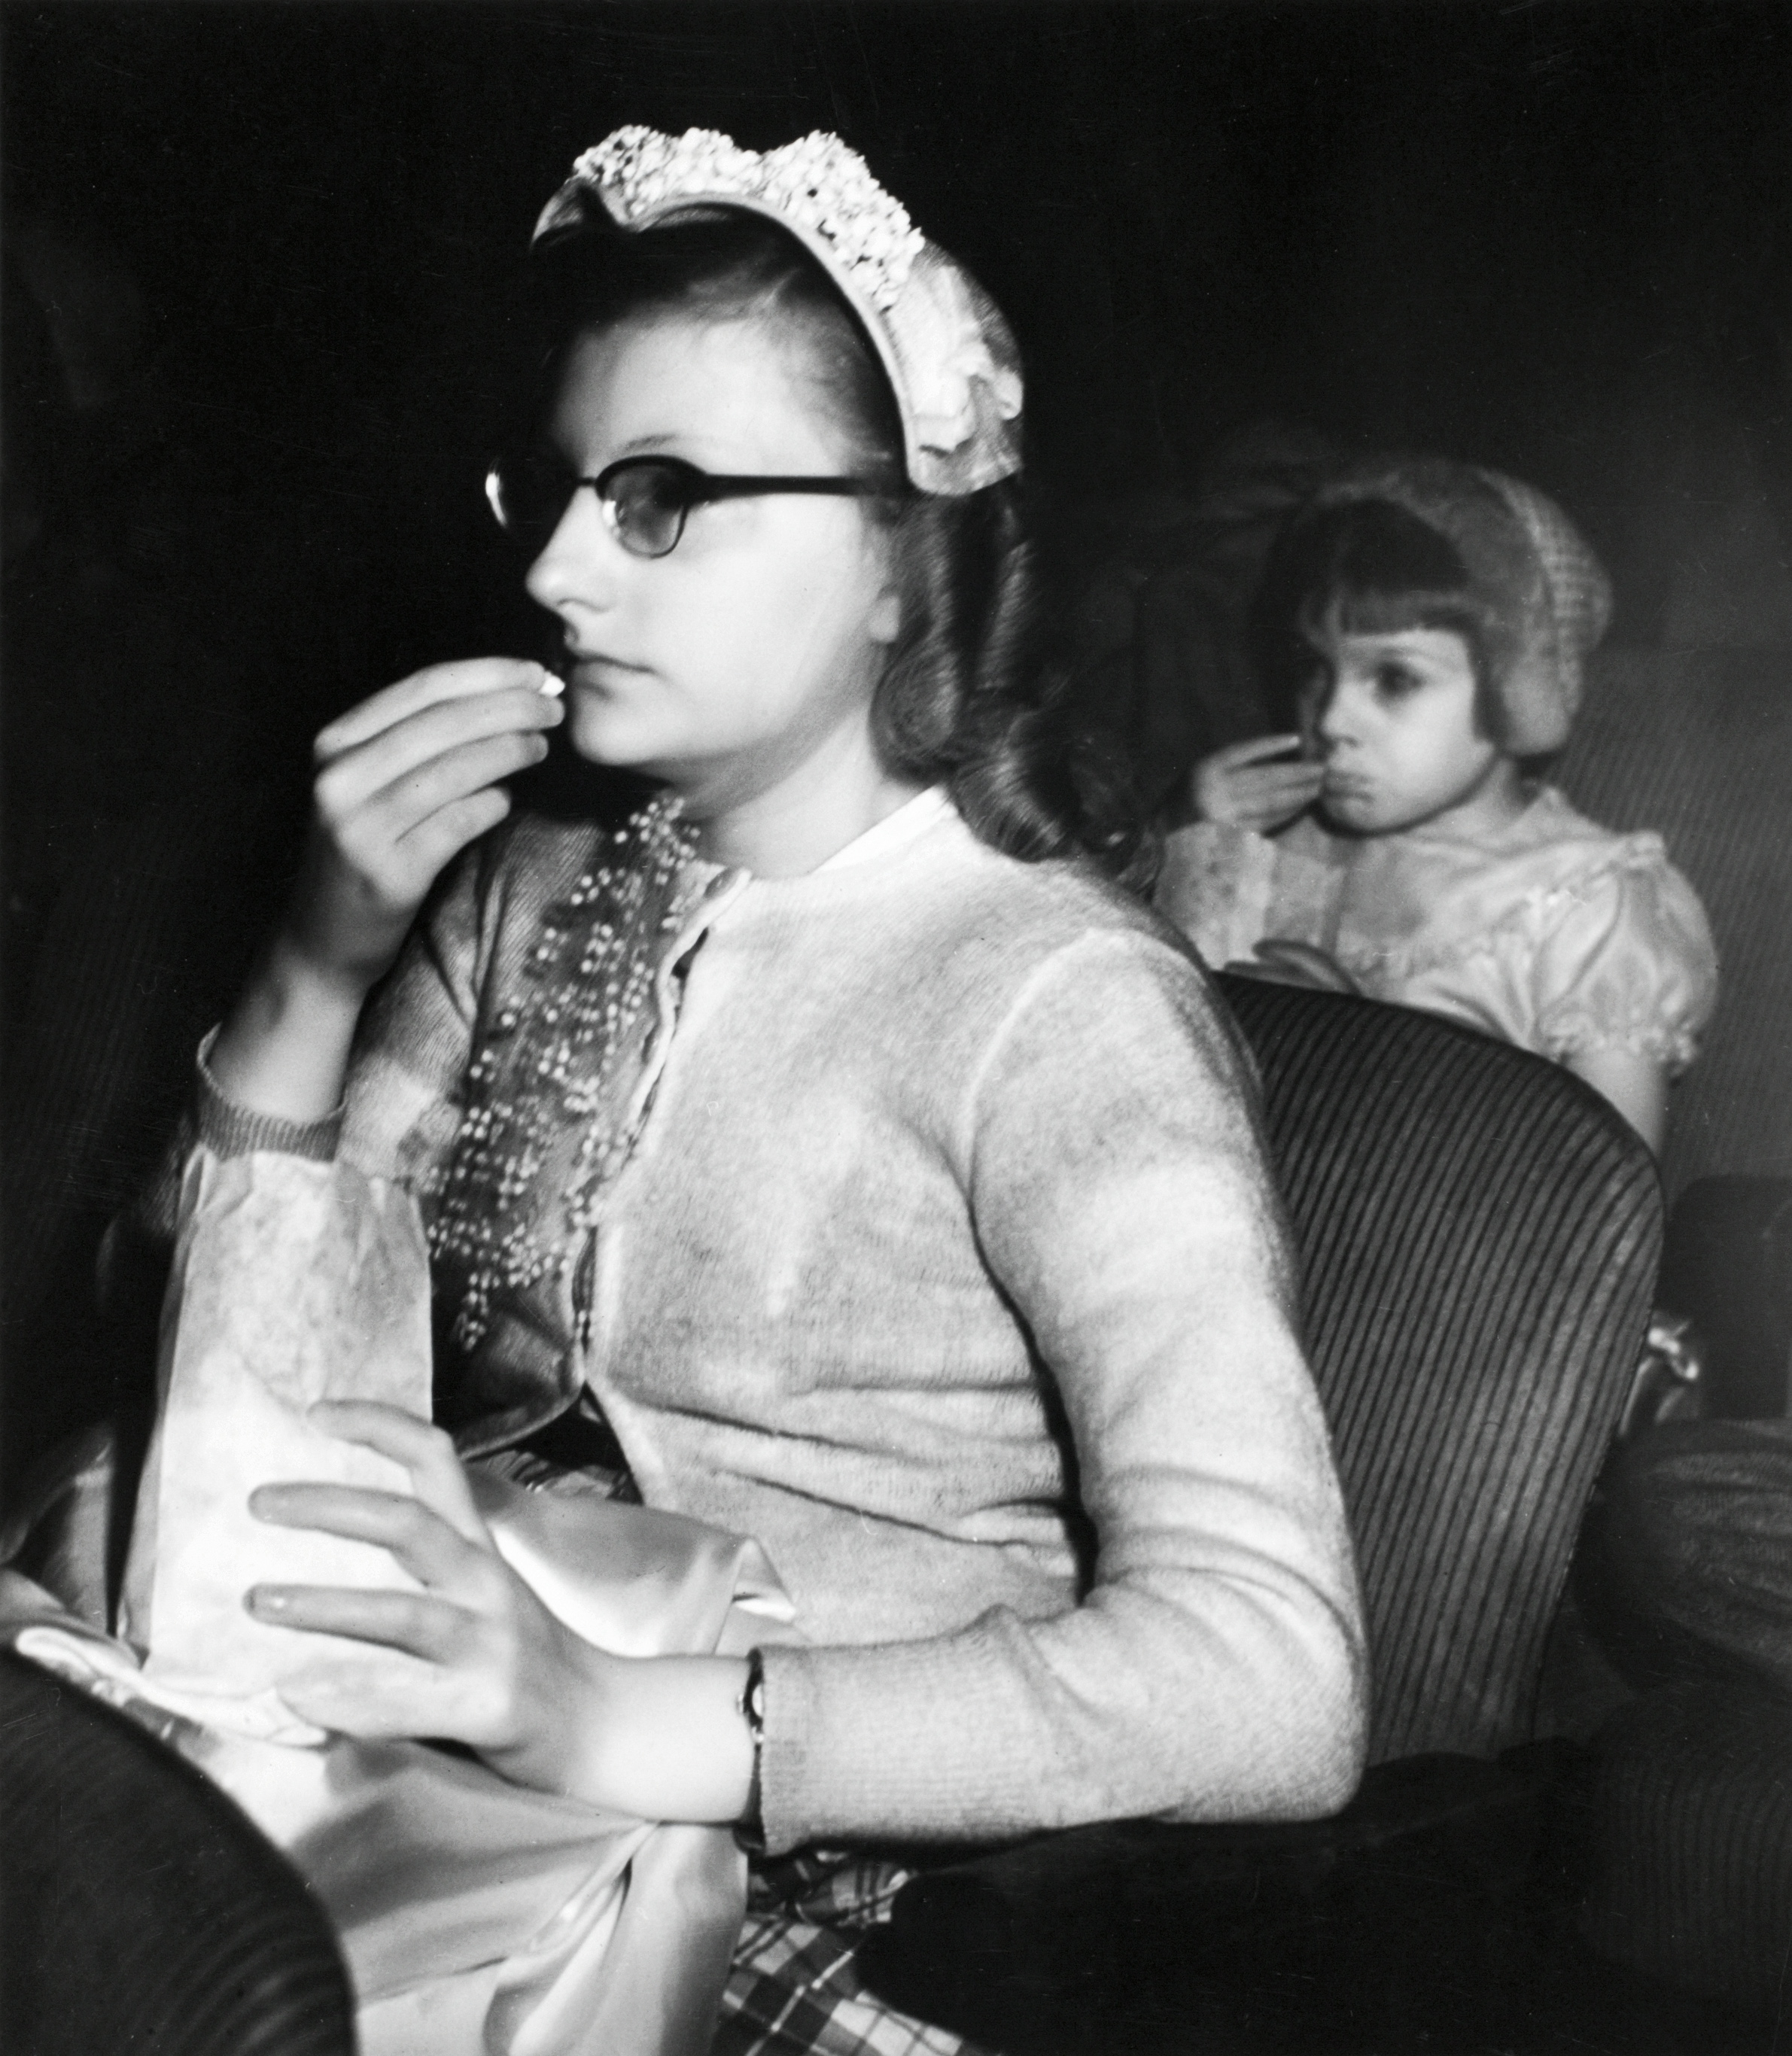 TRANSFIXED: Girl eating popcorn, ca. 1943. © Weegee/ International Center of Photography.